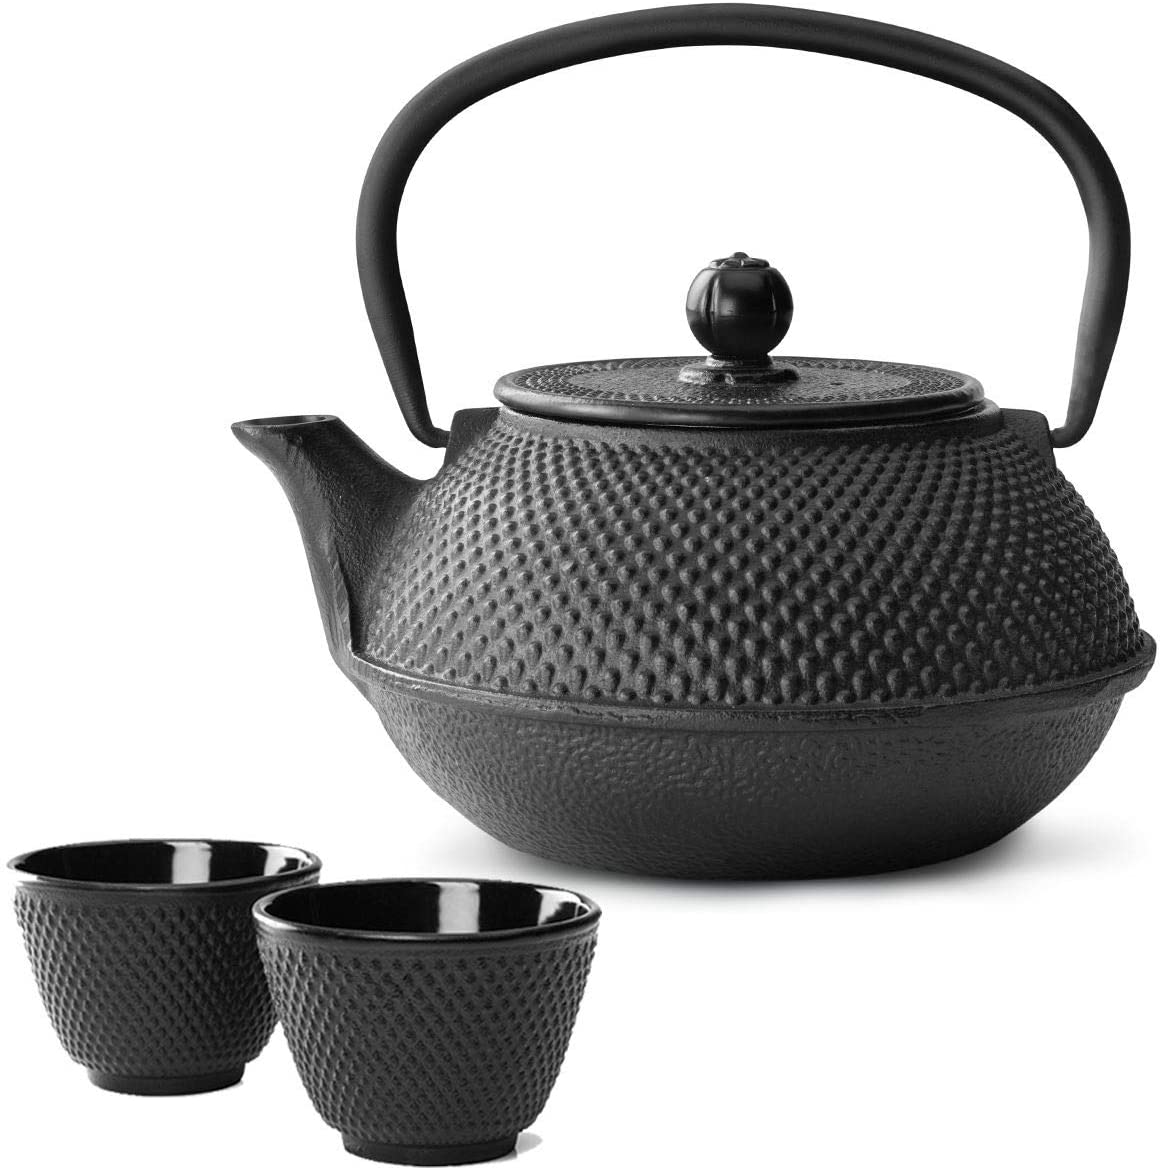 Bredemeijer Asian Cast Iron Teapot Set 0.8 Litres with Tea Filter Strainer with Tea Cup (2 Cups)